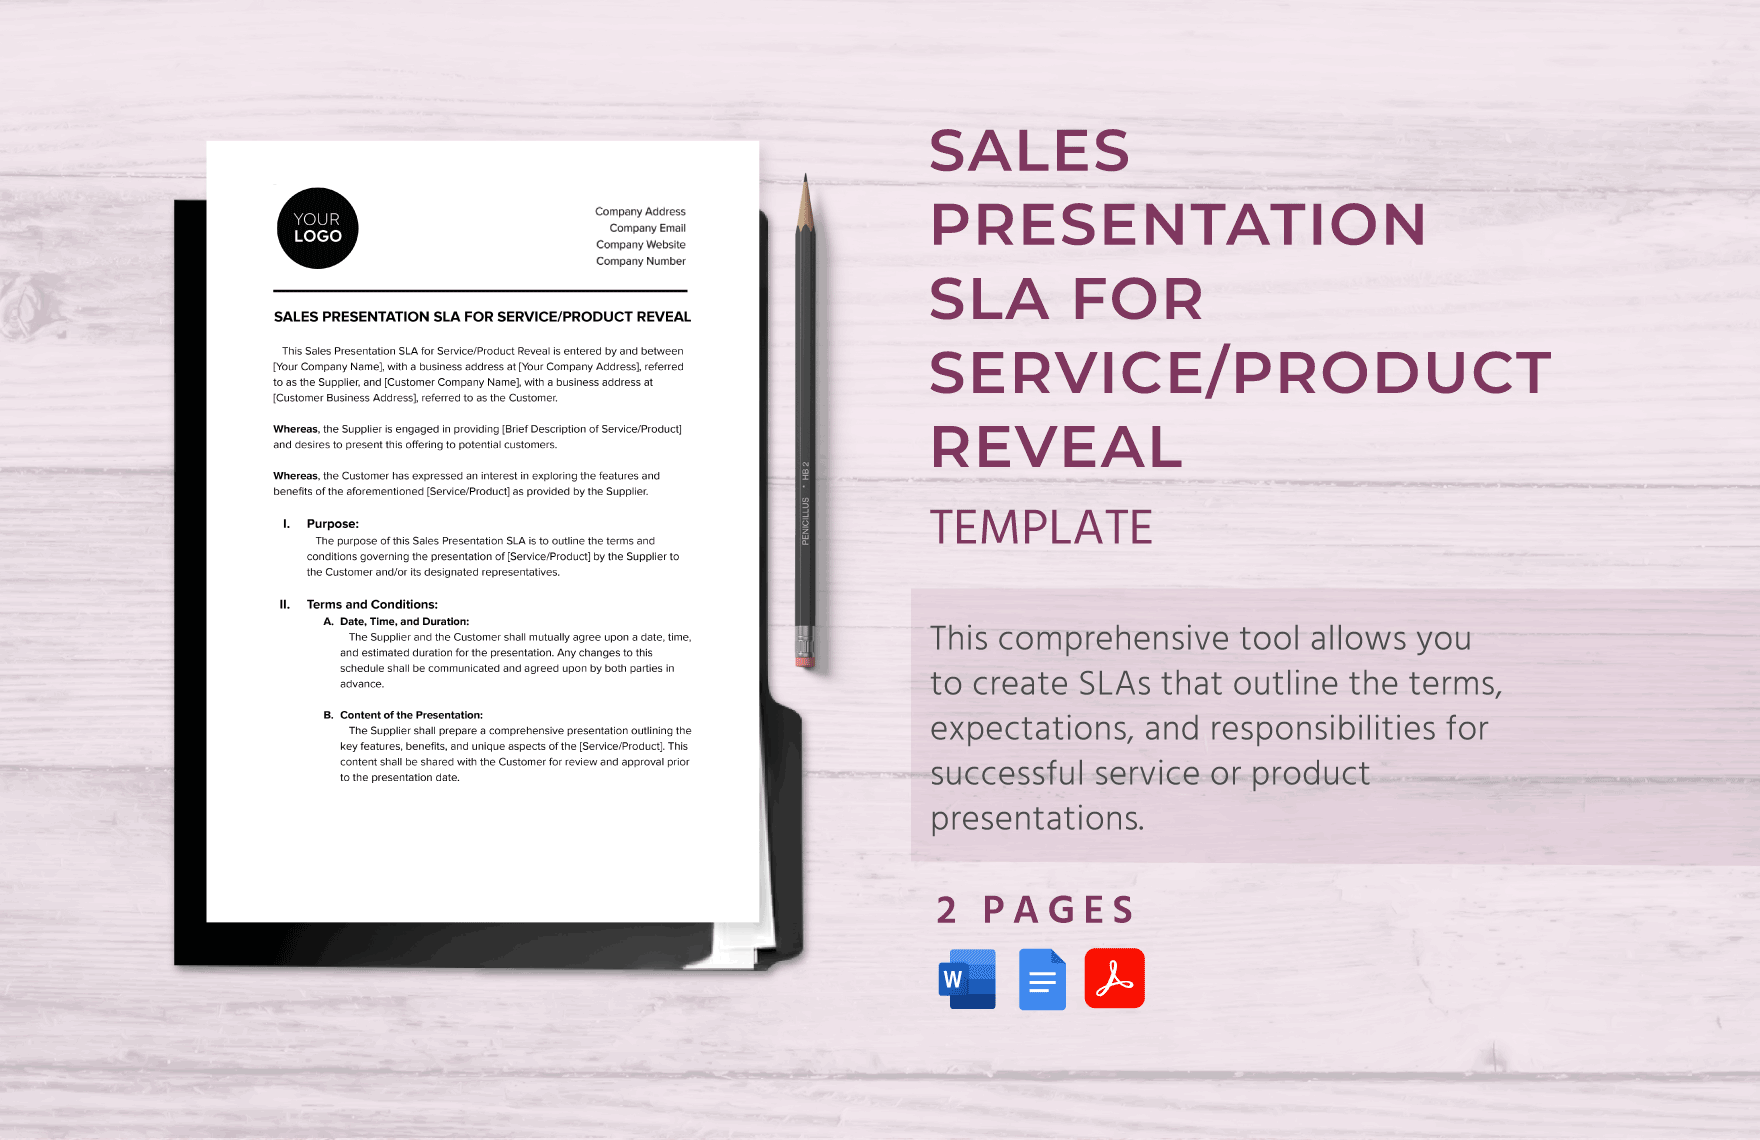 Sales Presentation SLA for Service/Product Reveal Template in Word, Google Docs, PDF